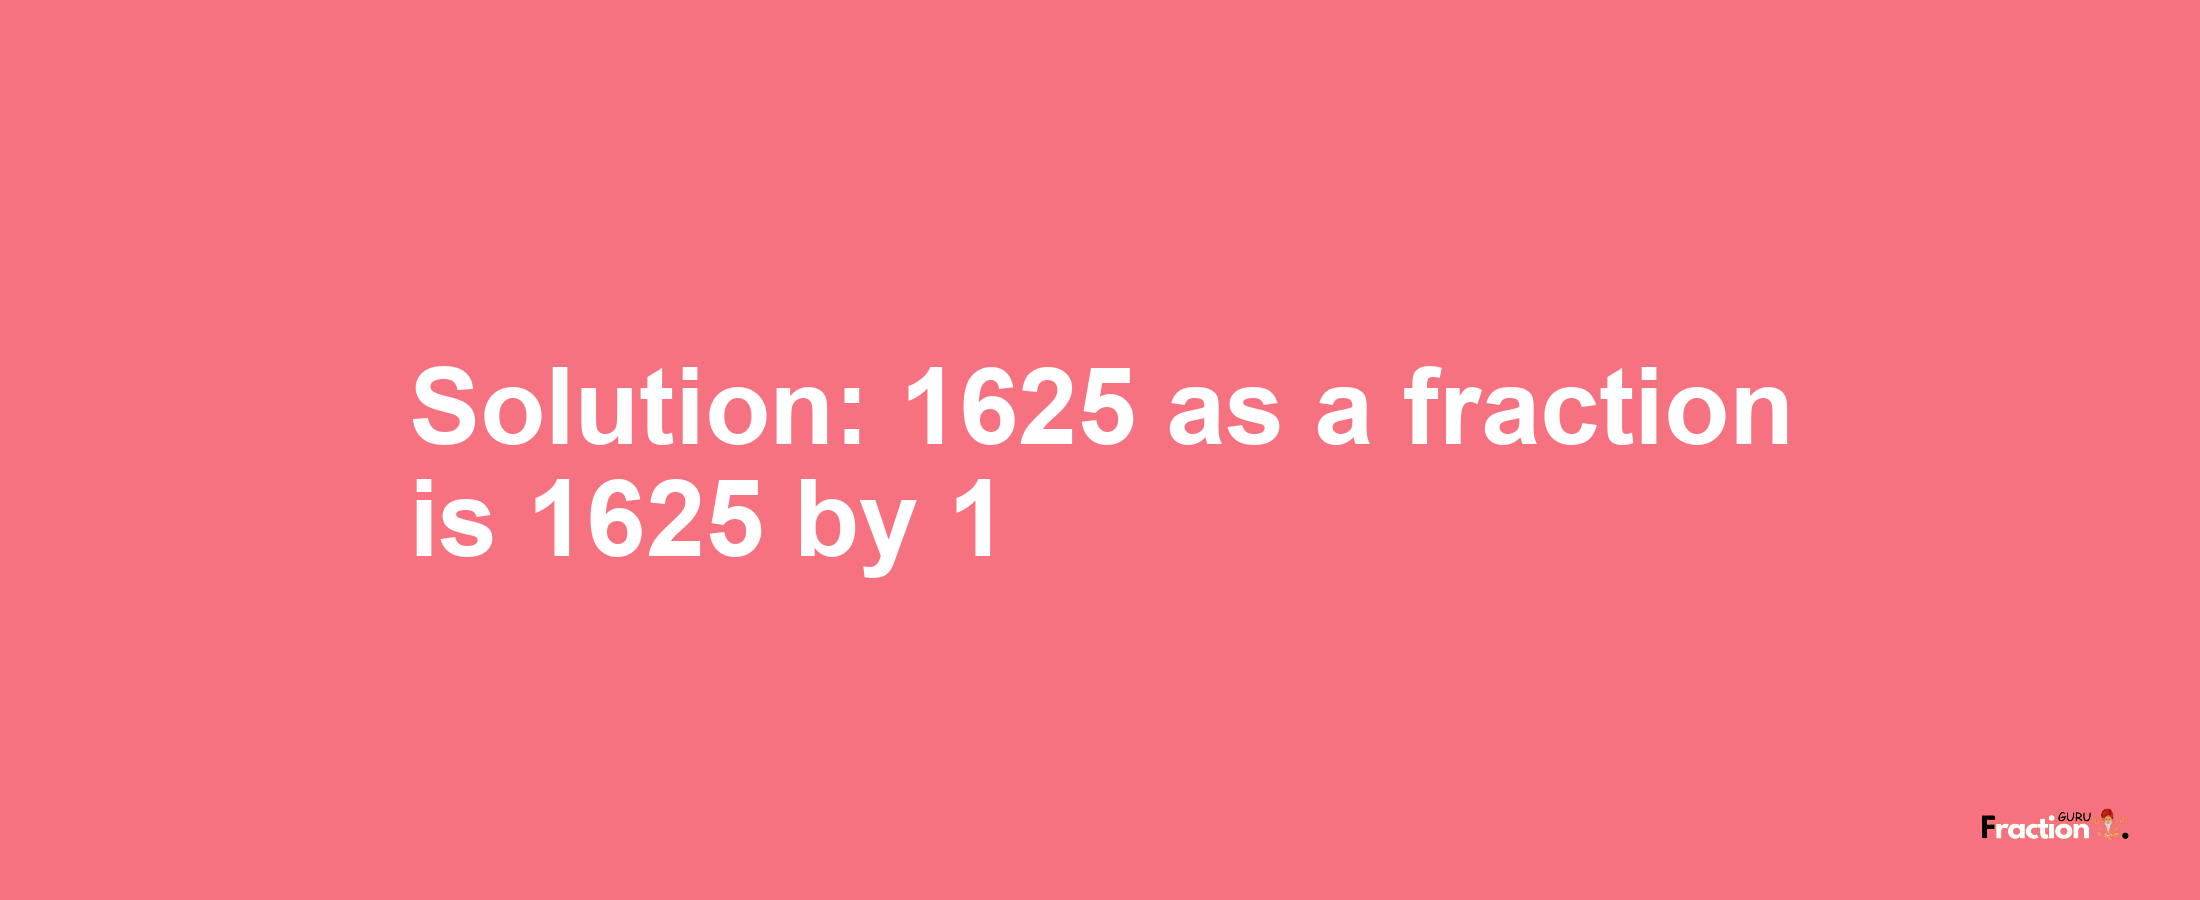 Solution:1625 as a fraction is 1625/1